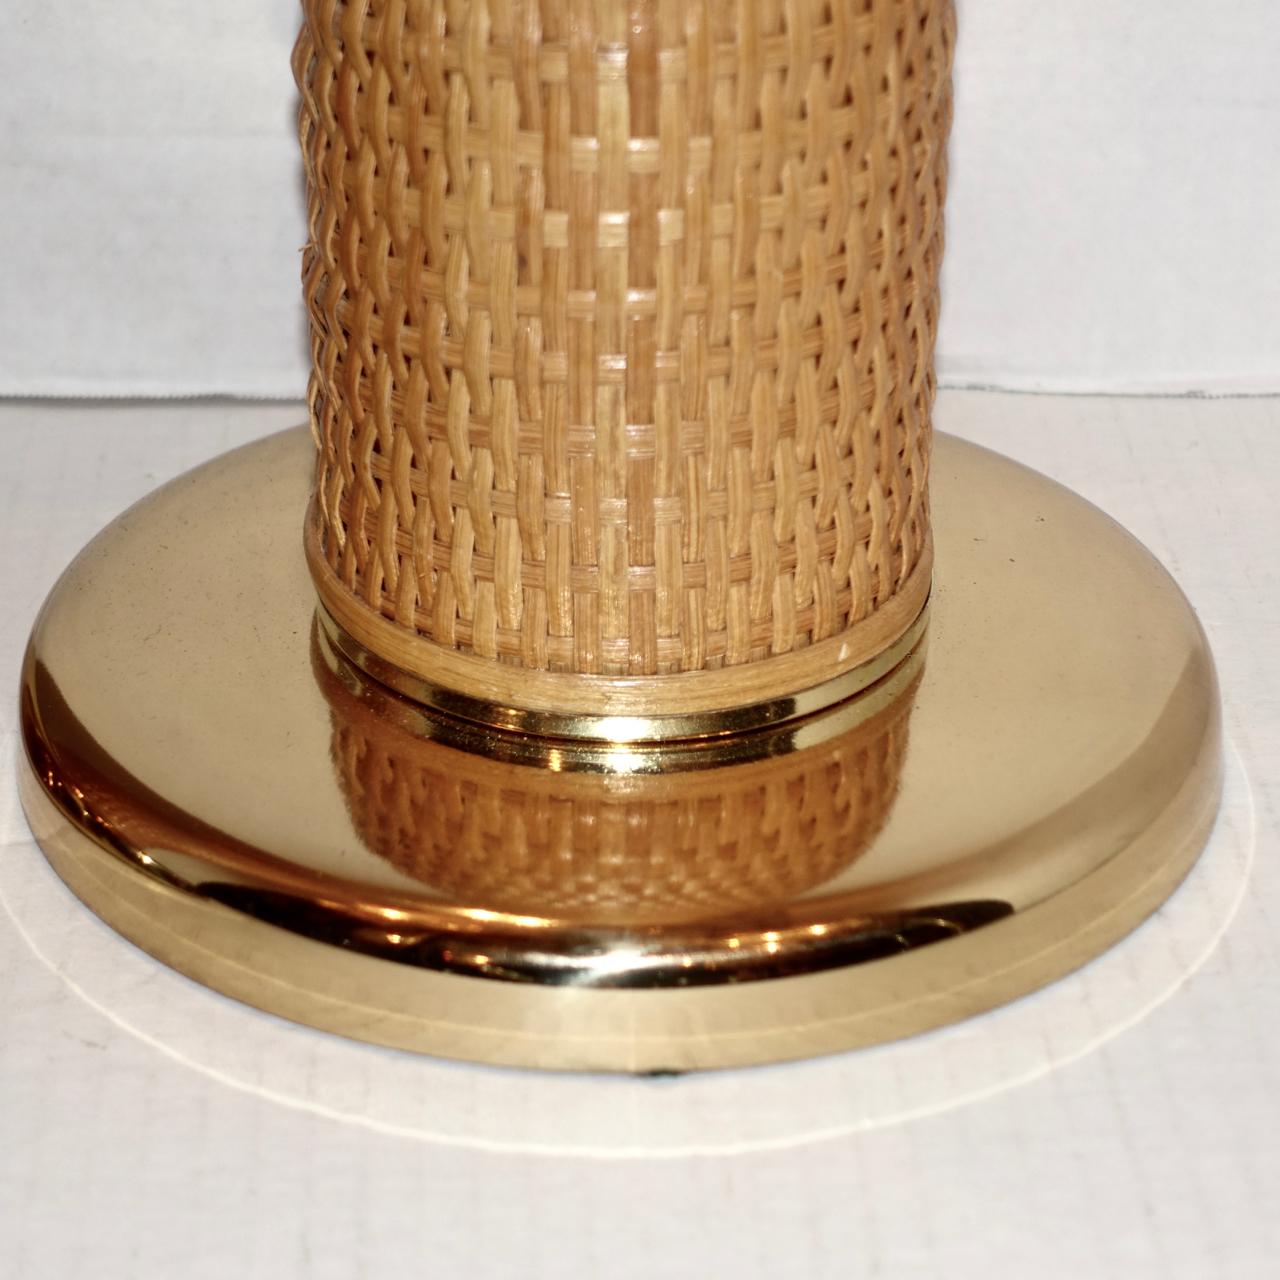 Pair of American circa 1960's wicker table lamps with brass bases.

Measurements:
Height of body: 20